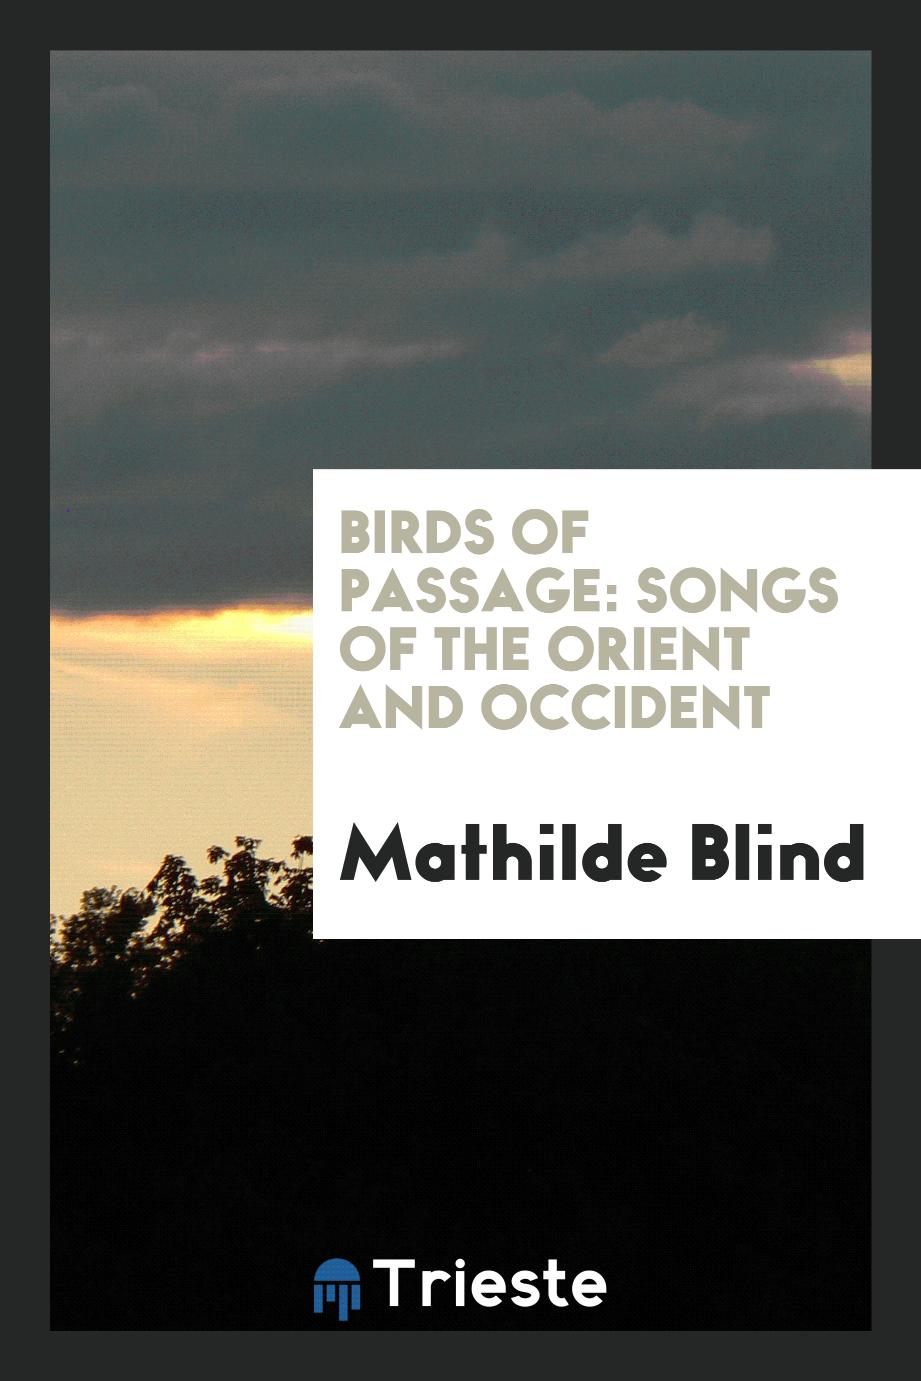 Birds of passage: songs of the orient and occident